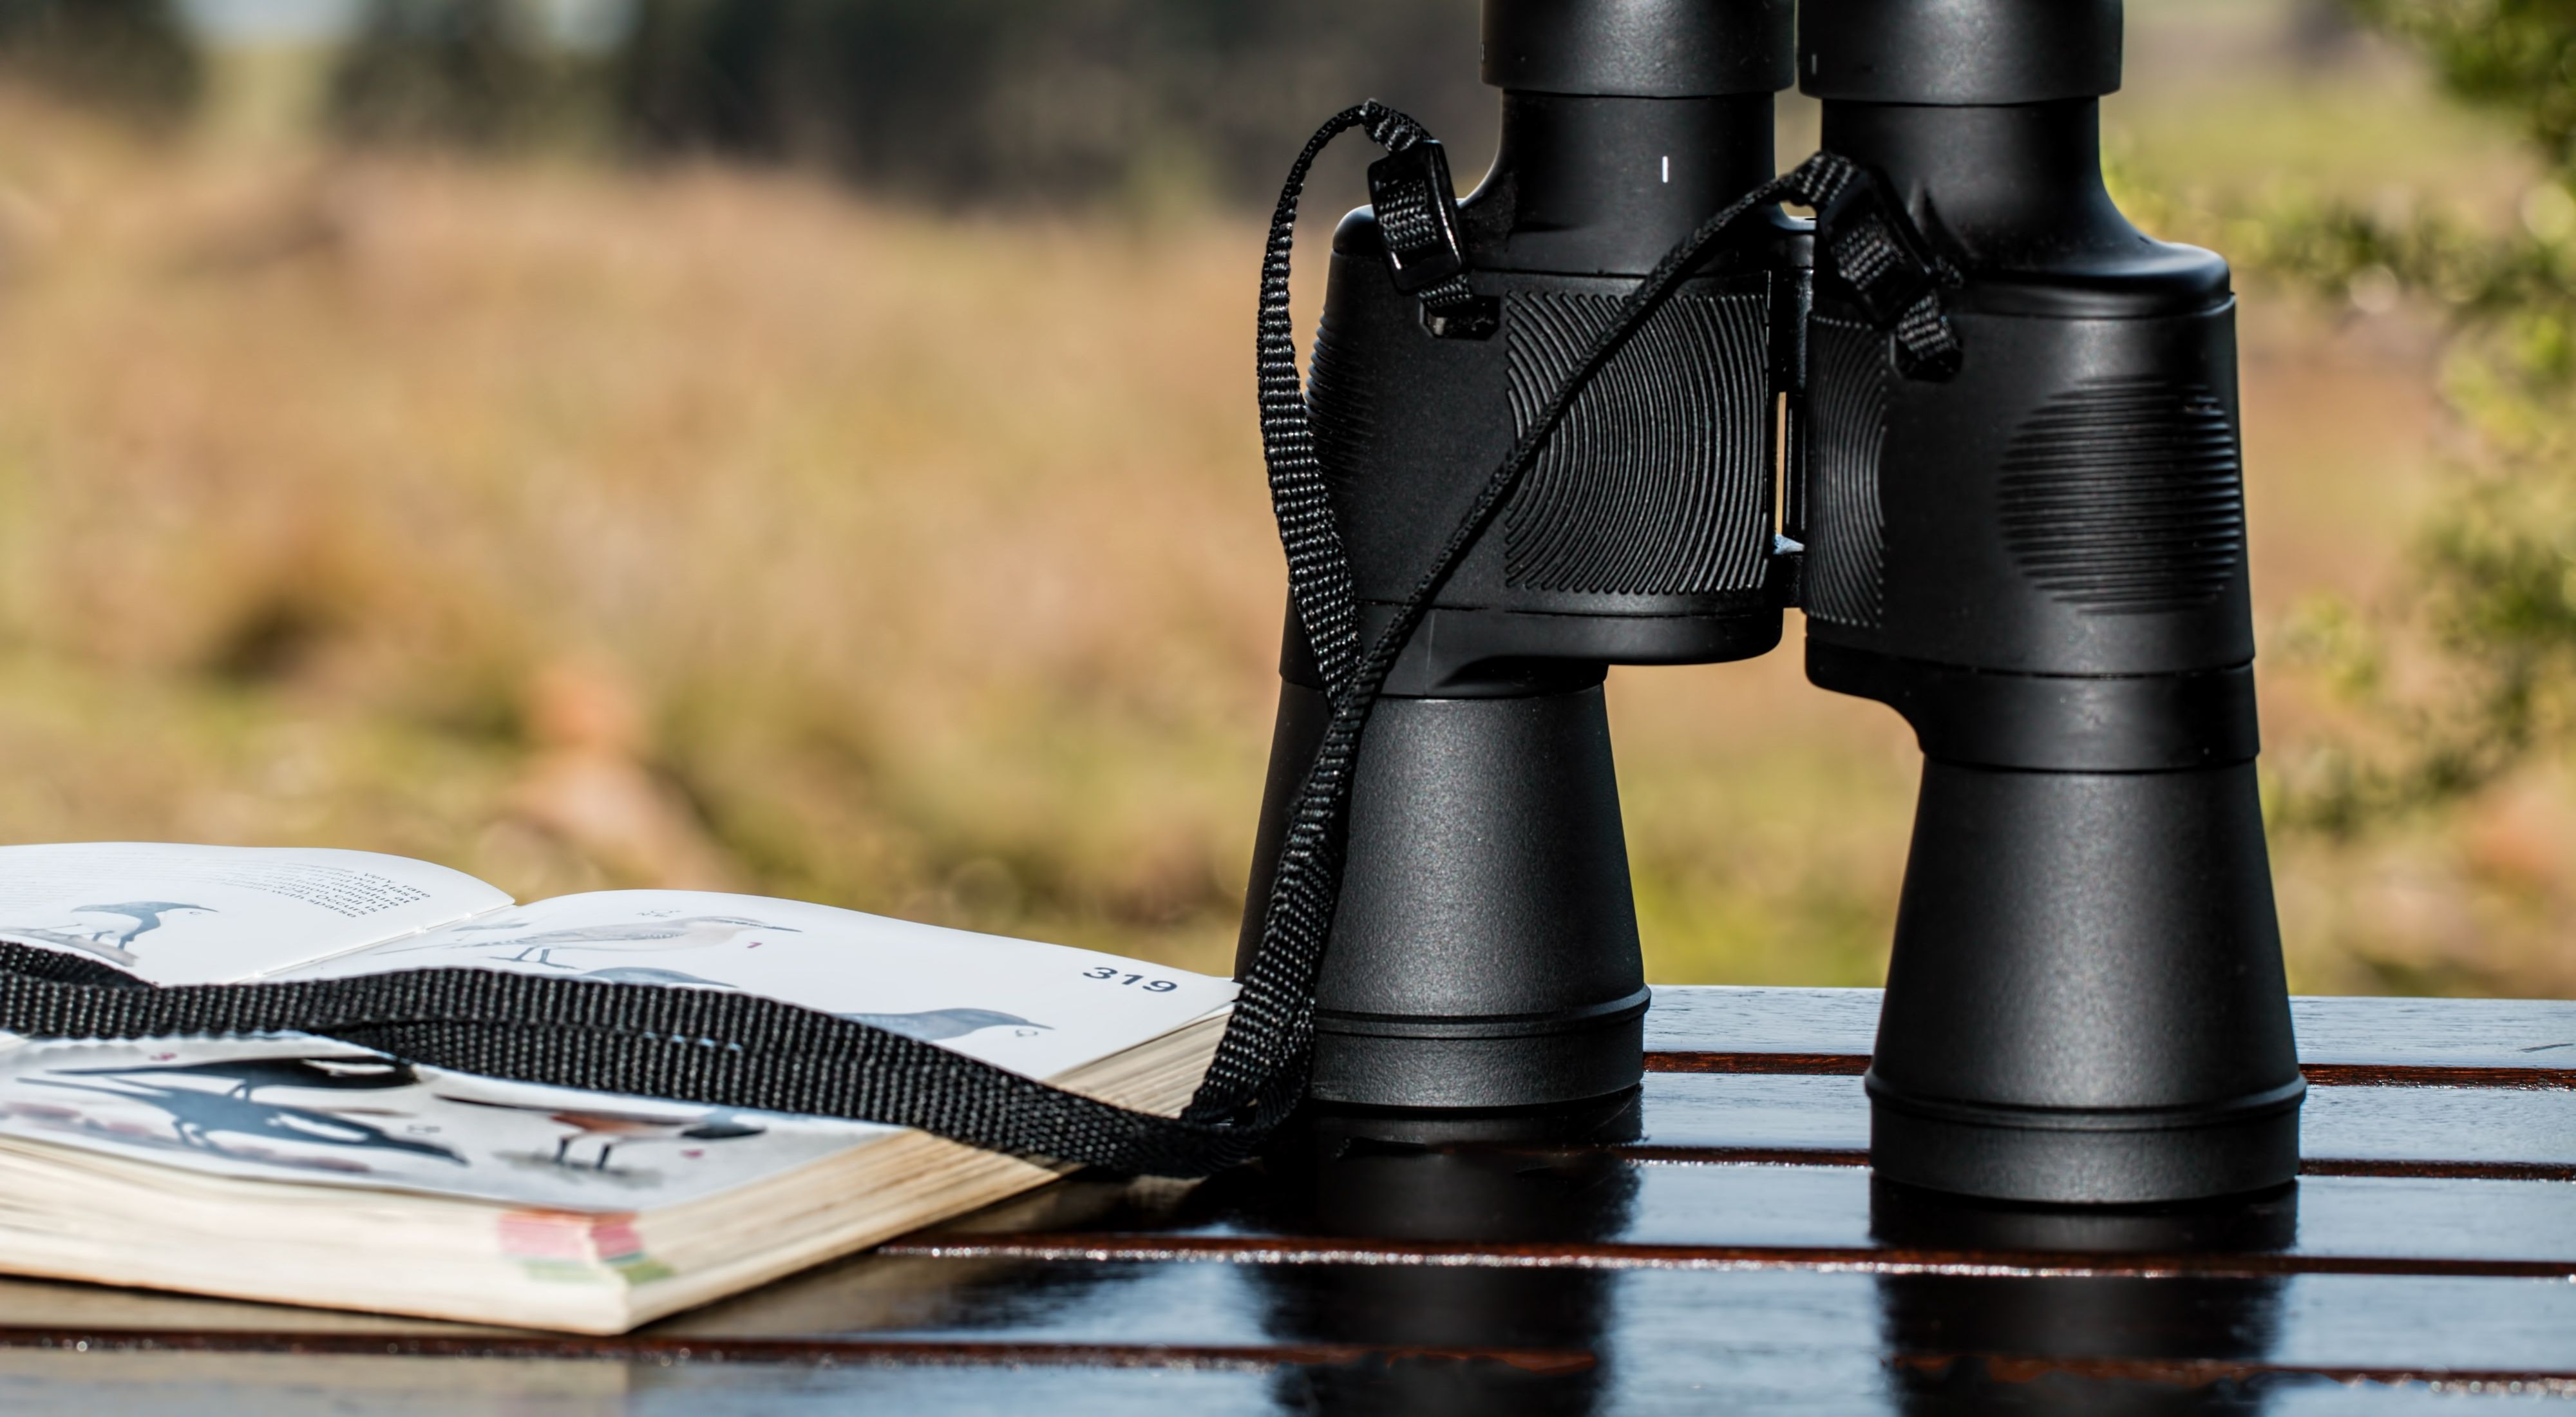 A book and binoculars on a table with mountain scene in distance. 